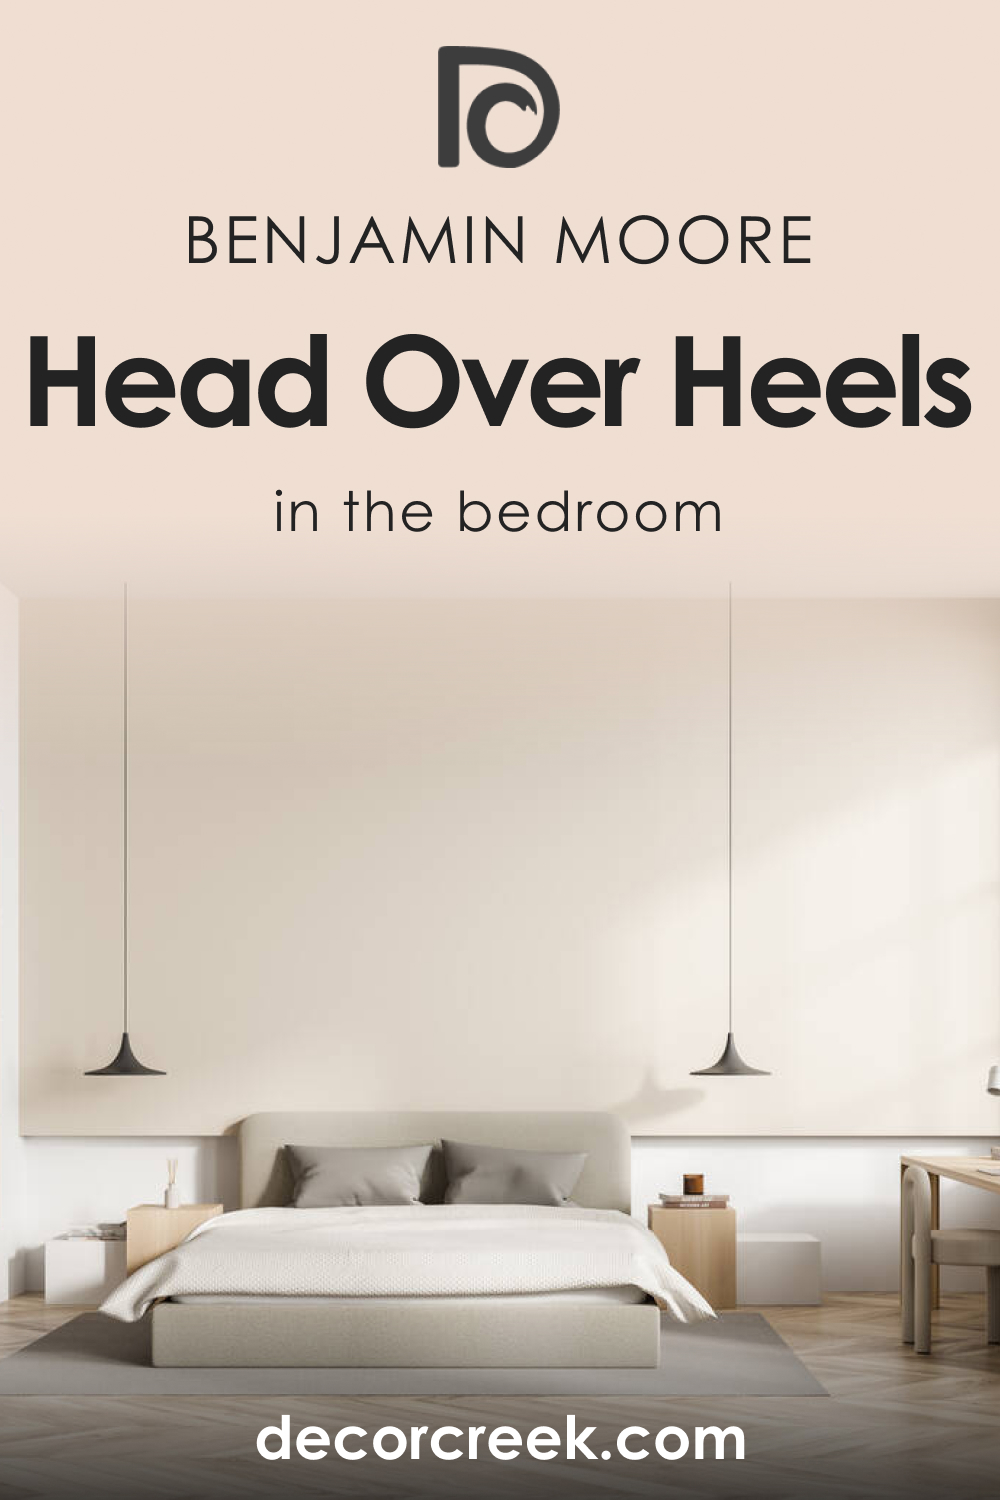 How to Use Head Over Heels AF-250 in the Bedroom?